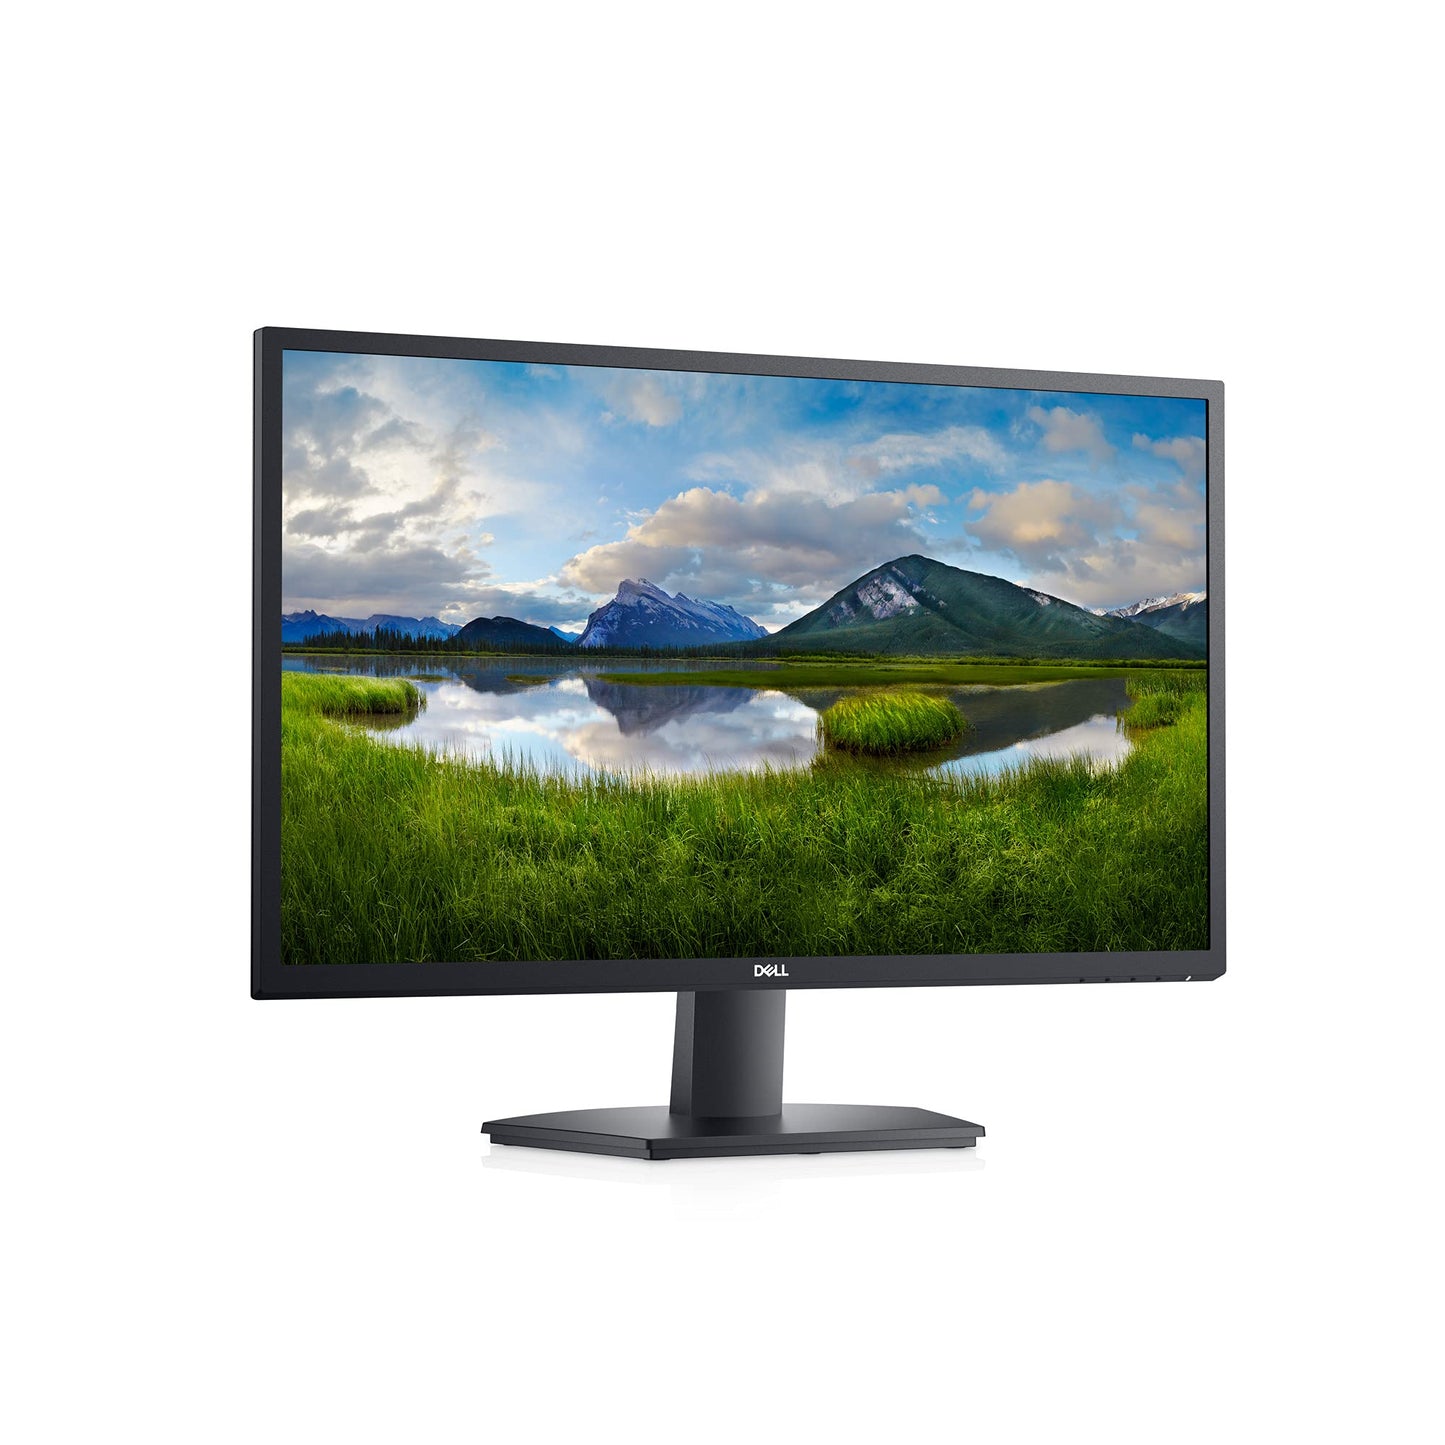 Dell SE2722HX Monitor - 27 inch FHD (1920 x 1080) 16:9 Ratio with Comfortview (TUV-Certified), 75Hz Refresh Rate, 16.7 Million Colors, Anti-Glare Screen with 3H Hardness - Black